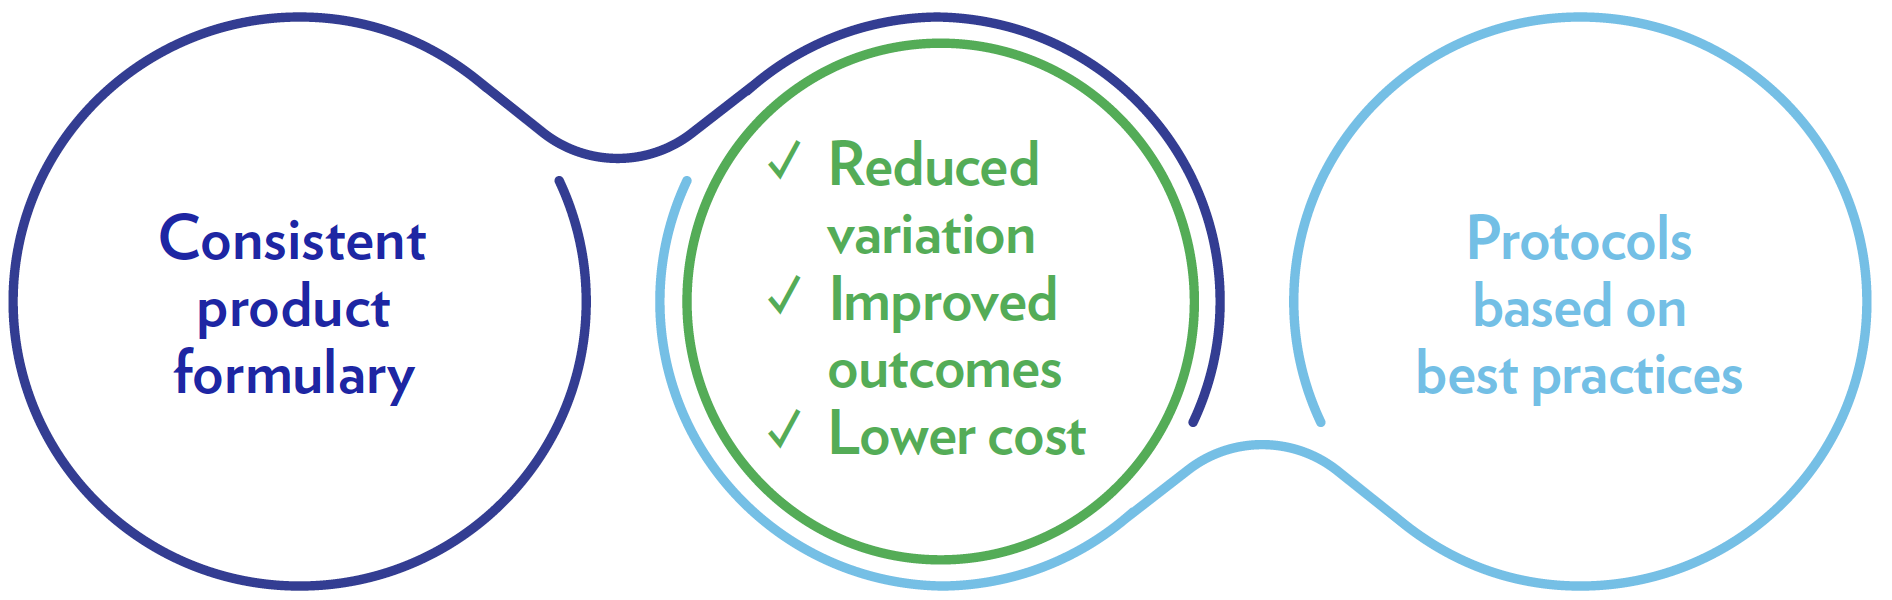 Figure 1. How product standardization can lower costs and increase total value